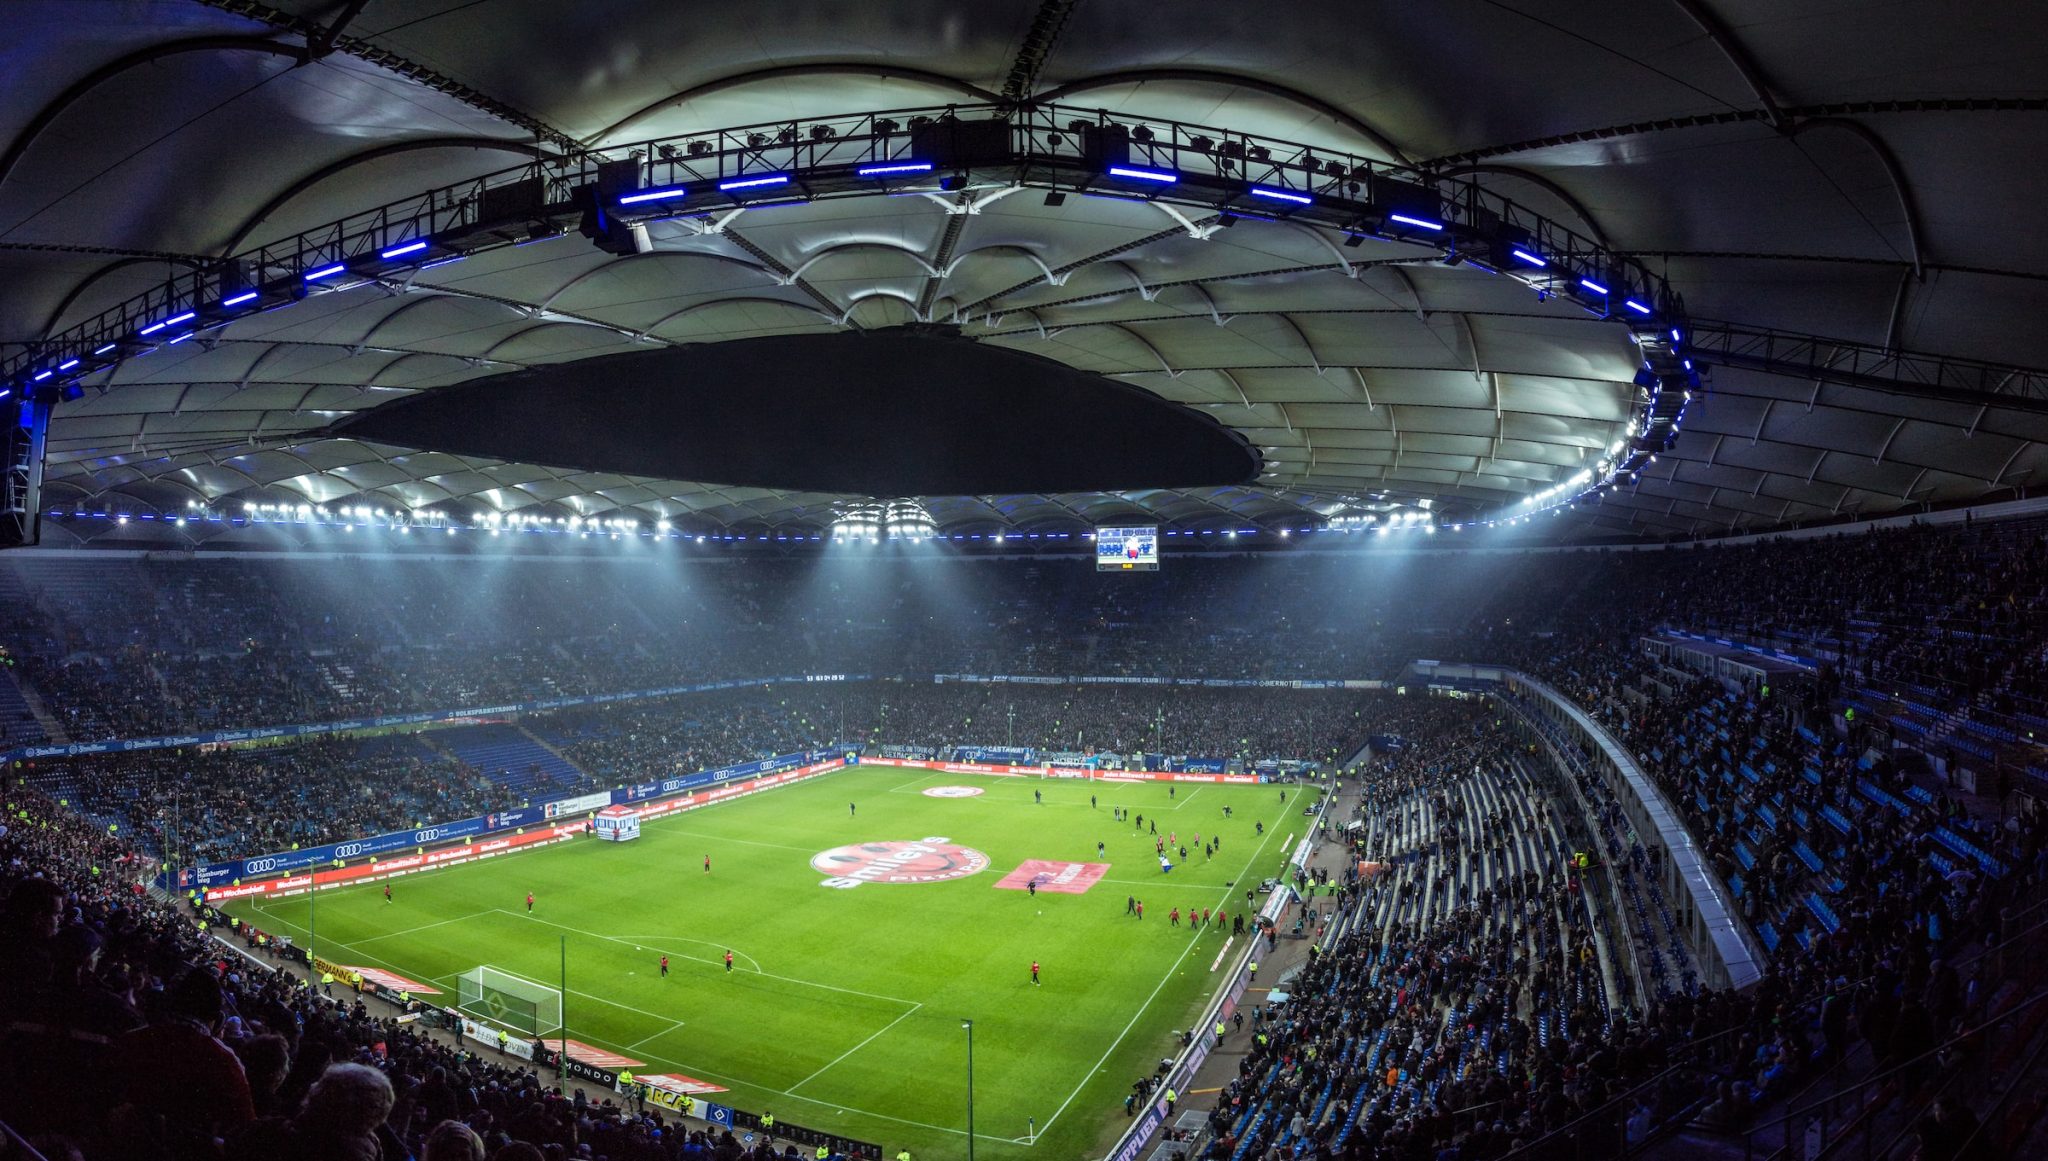 6 football stadiums around the world that every fan needs to visit